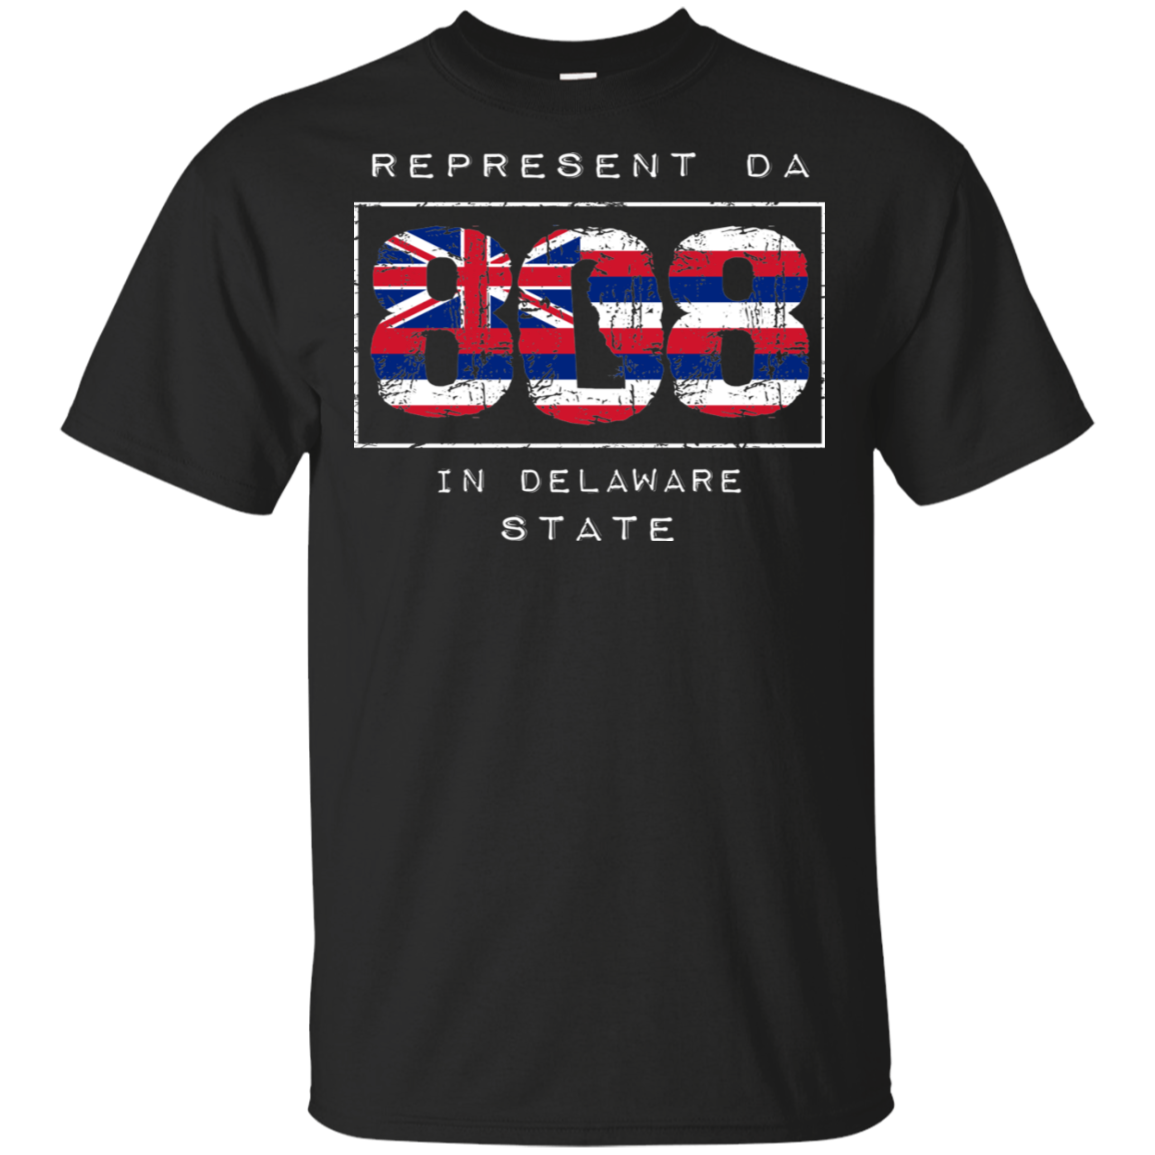 Rep Da 808 In Delaware State Ultra Cotton T-Shirt, T-Shirts, Hawaii Nei All Day